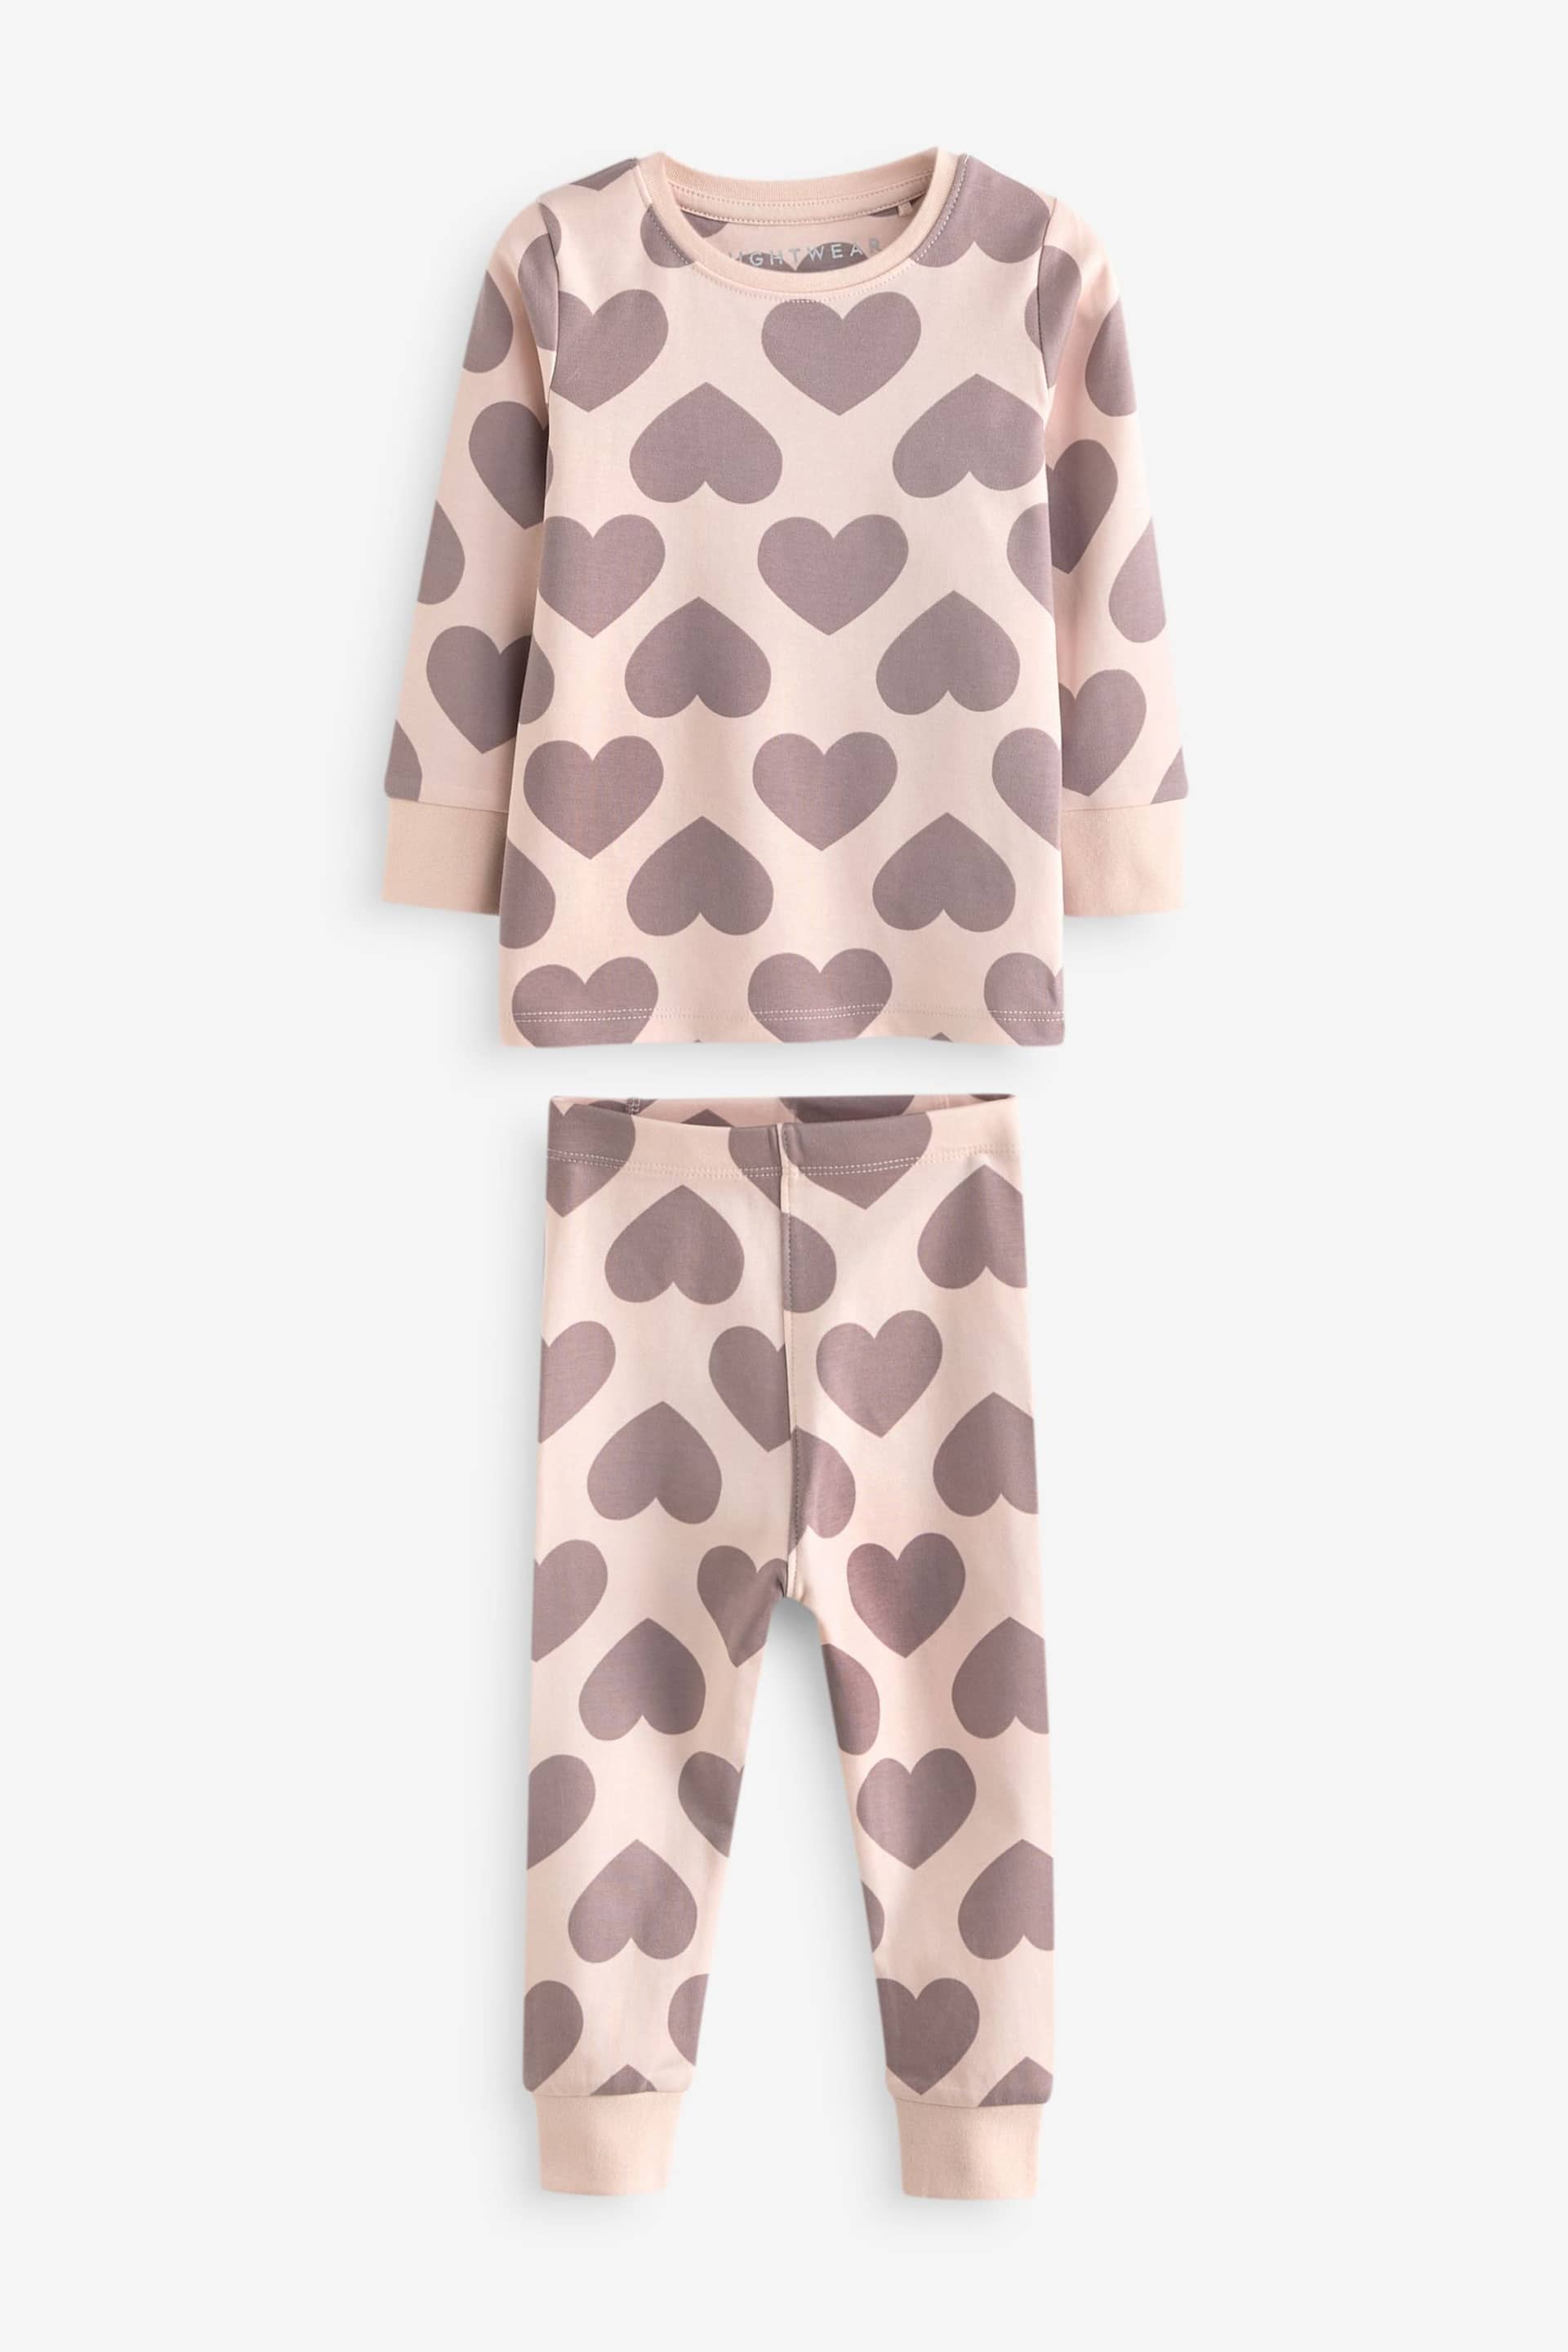 Neutral/ Pink Heart Stampy Pyjamas 3 Pack (9mths-16yrs) - Image 8 of 13